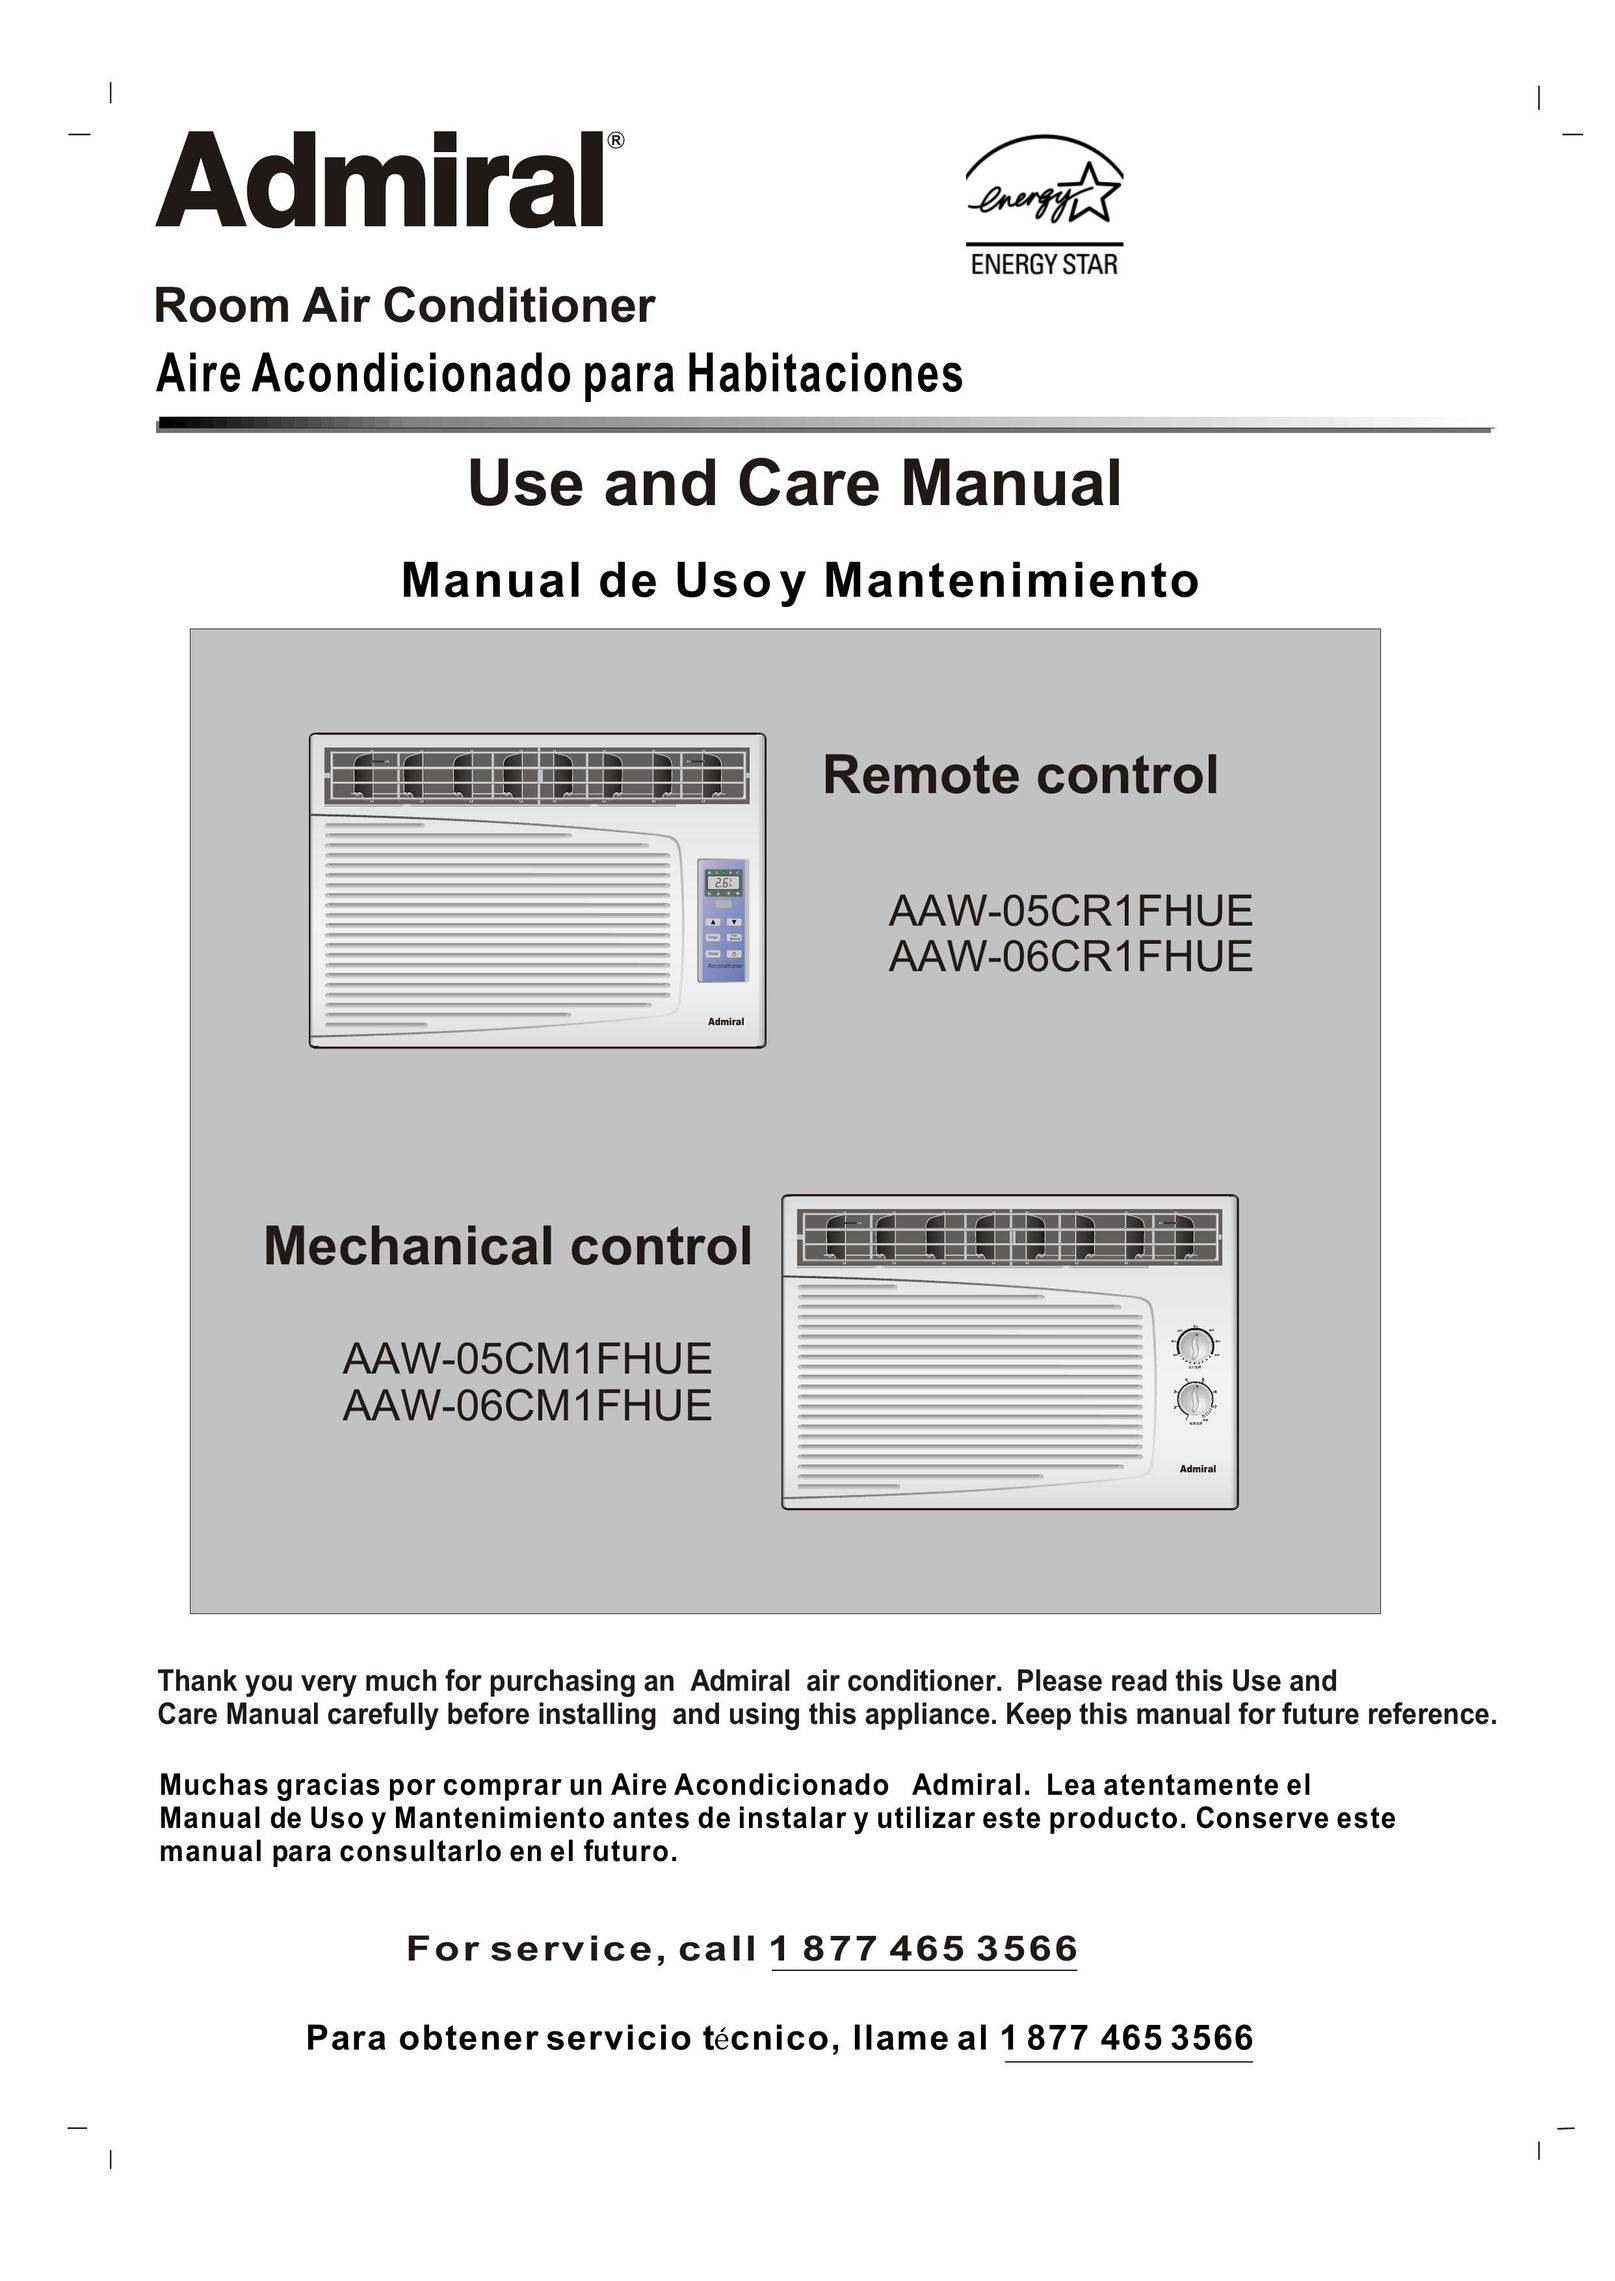 Admiral AAW-05CM1FHUE Air Conditioner User Manual